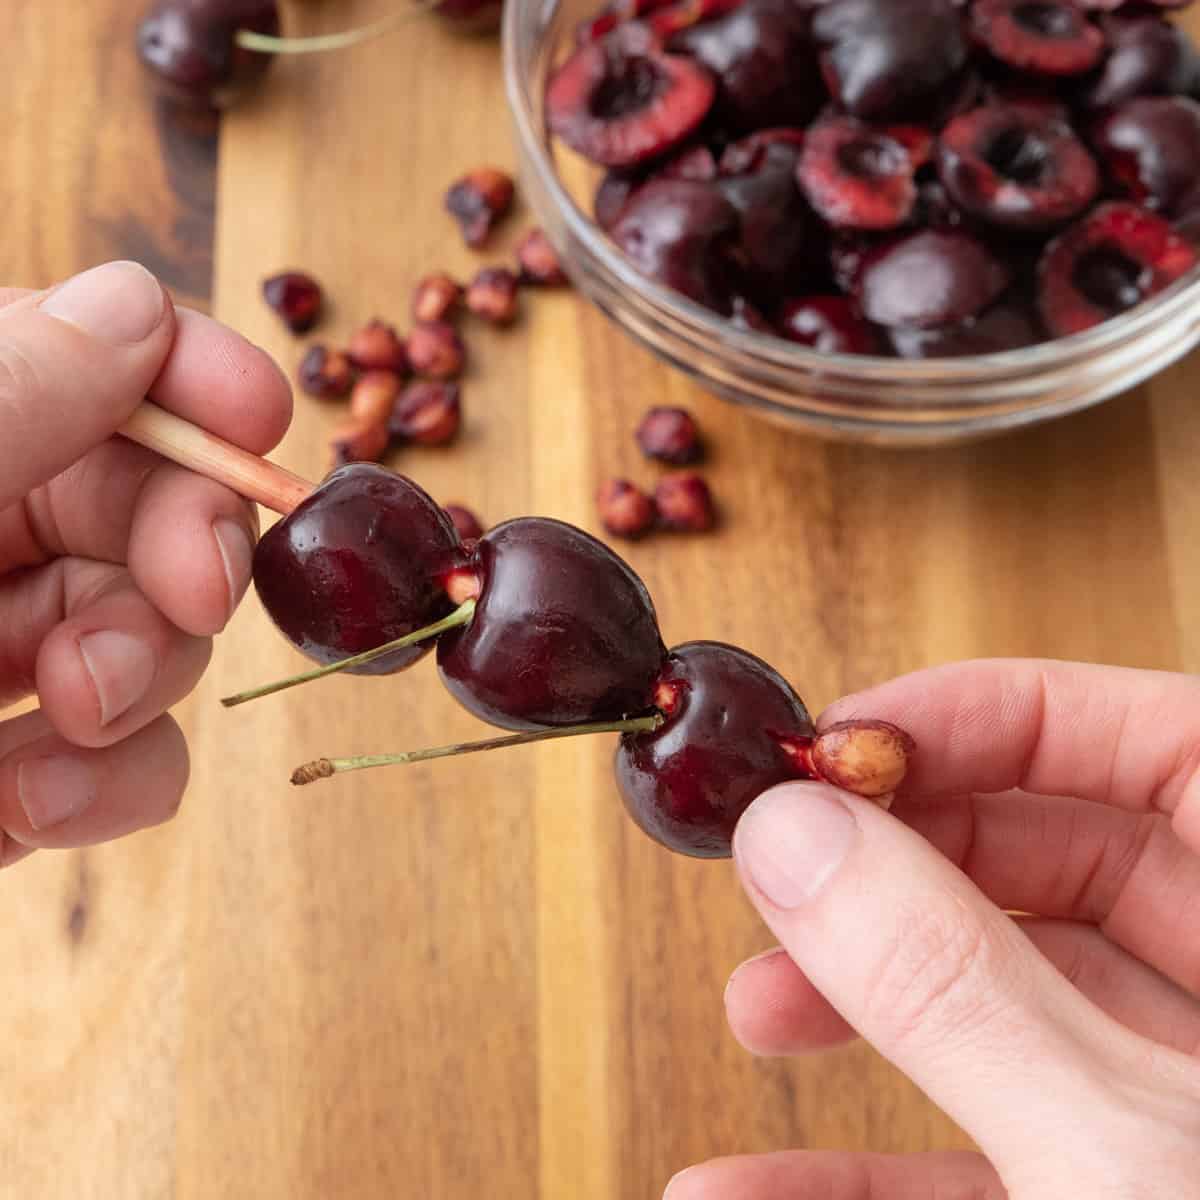 Hand holding a chopstick with 2 cherries on it and pushing the pit out of a 3rd cherry; cutting board with pitted cherries next to pits in the background.